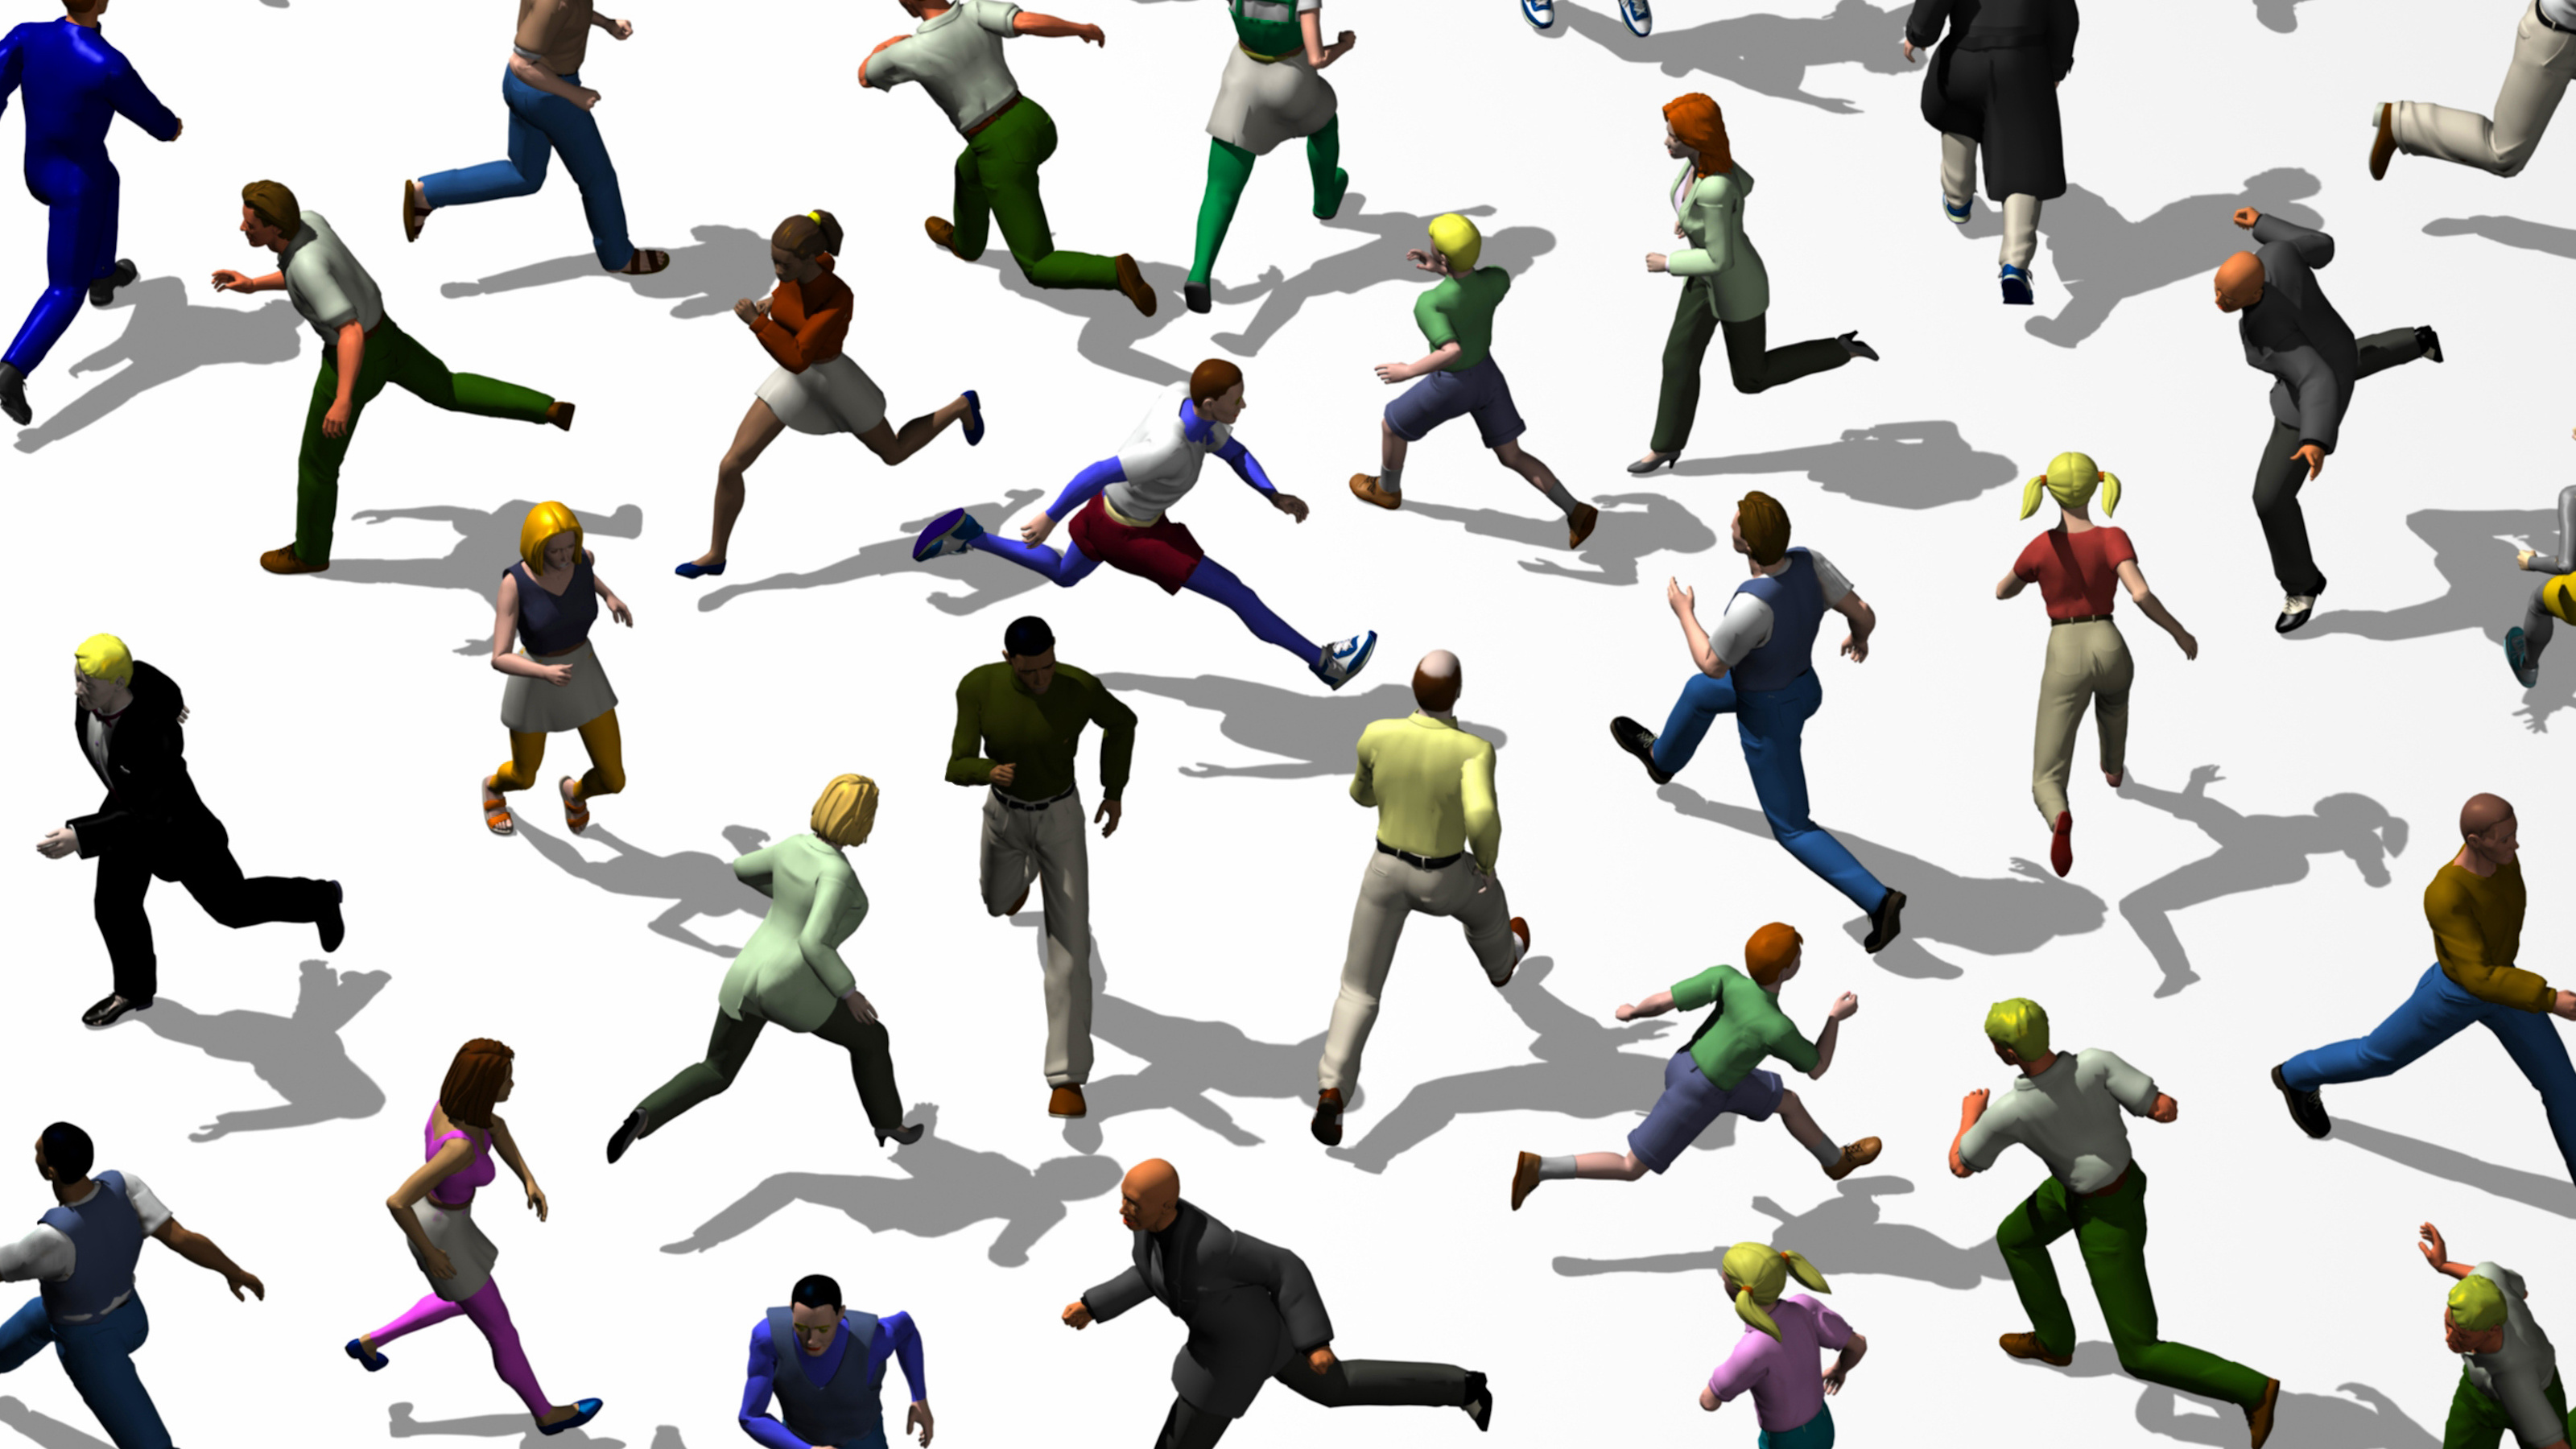 A diverse group of people, including L&D professionals, depicted in various action poses, running and walking against a white background.